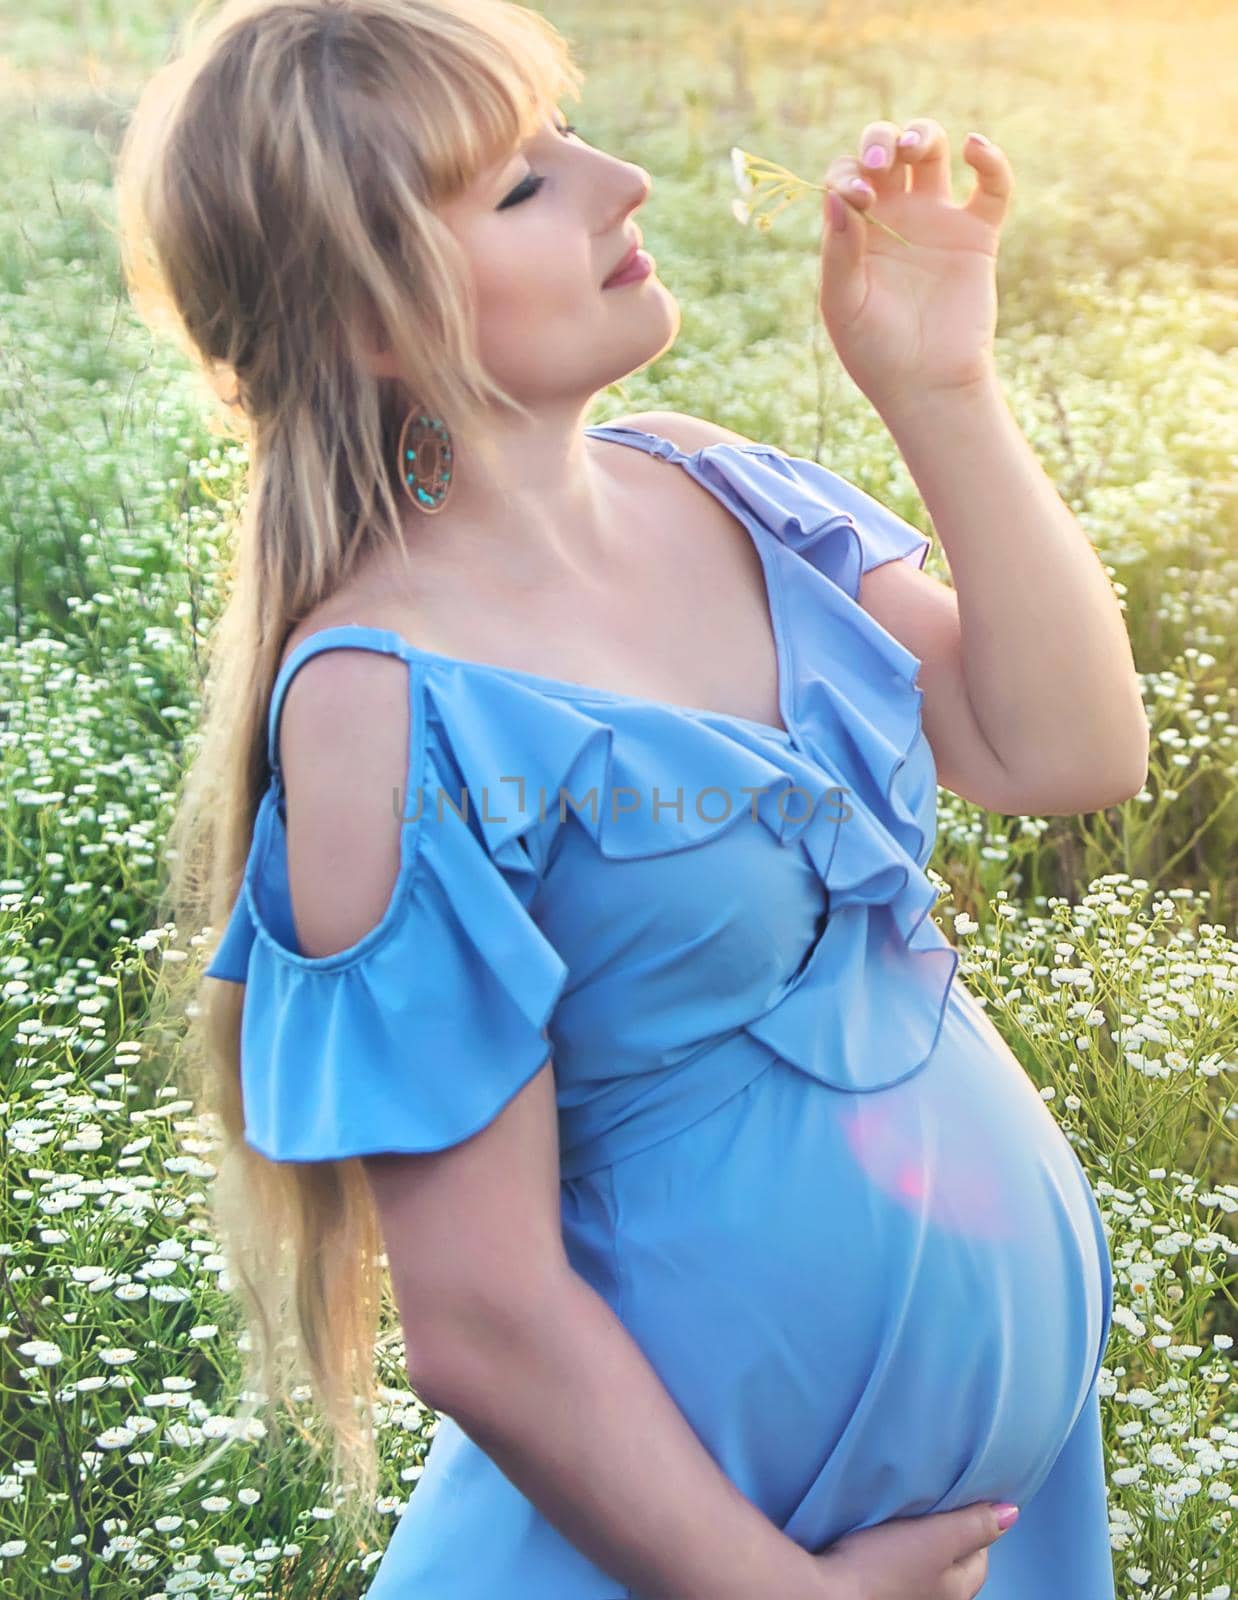 pregnant woman with camomiles in hands. Selective focus. nature.